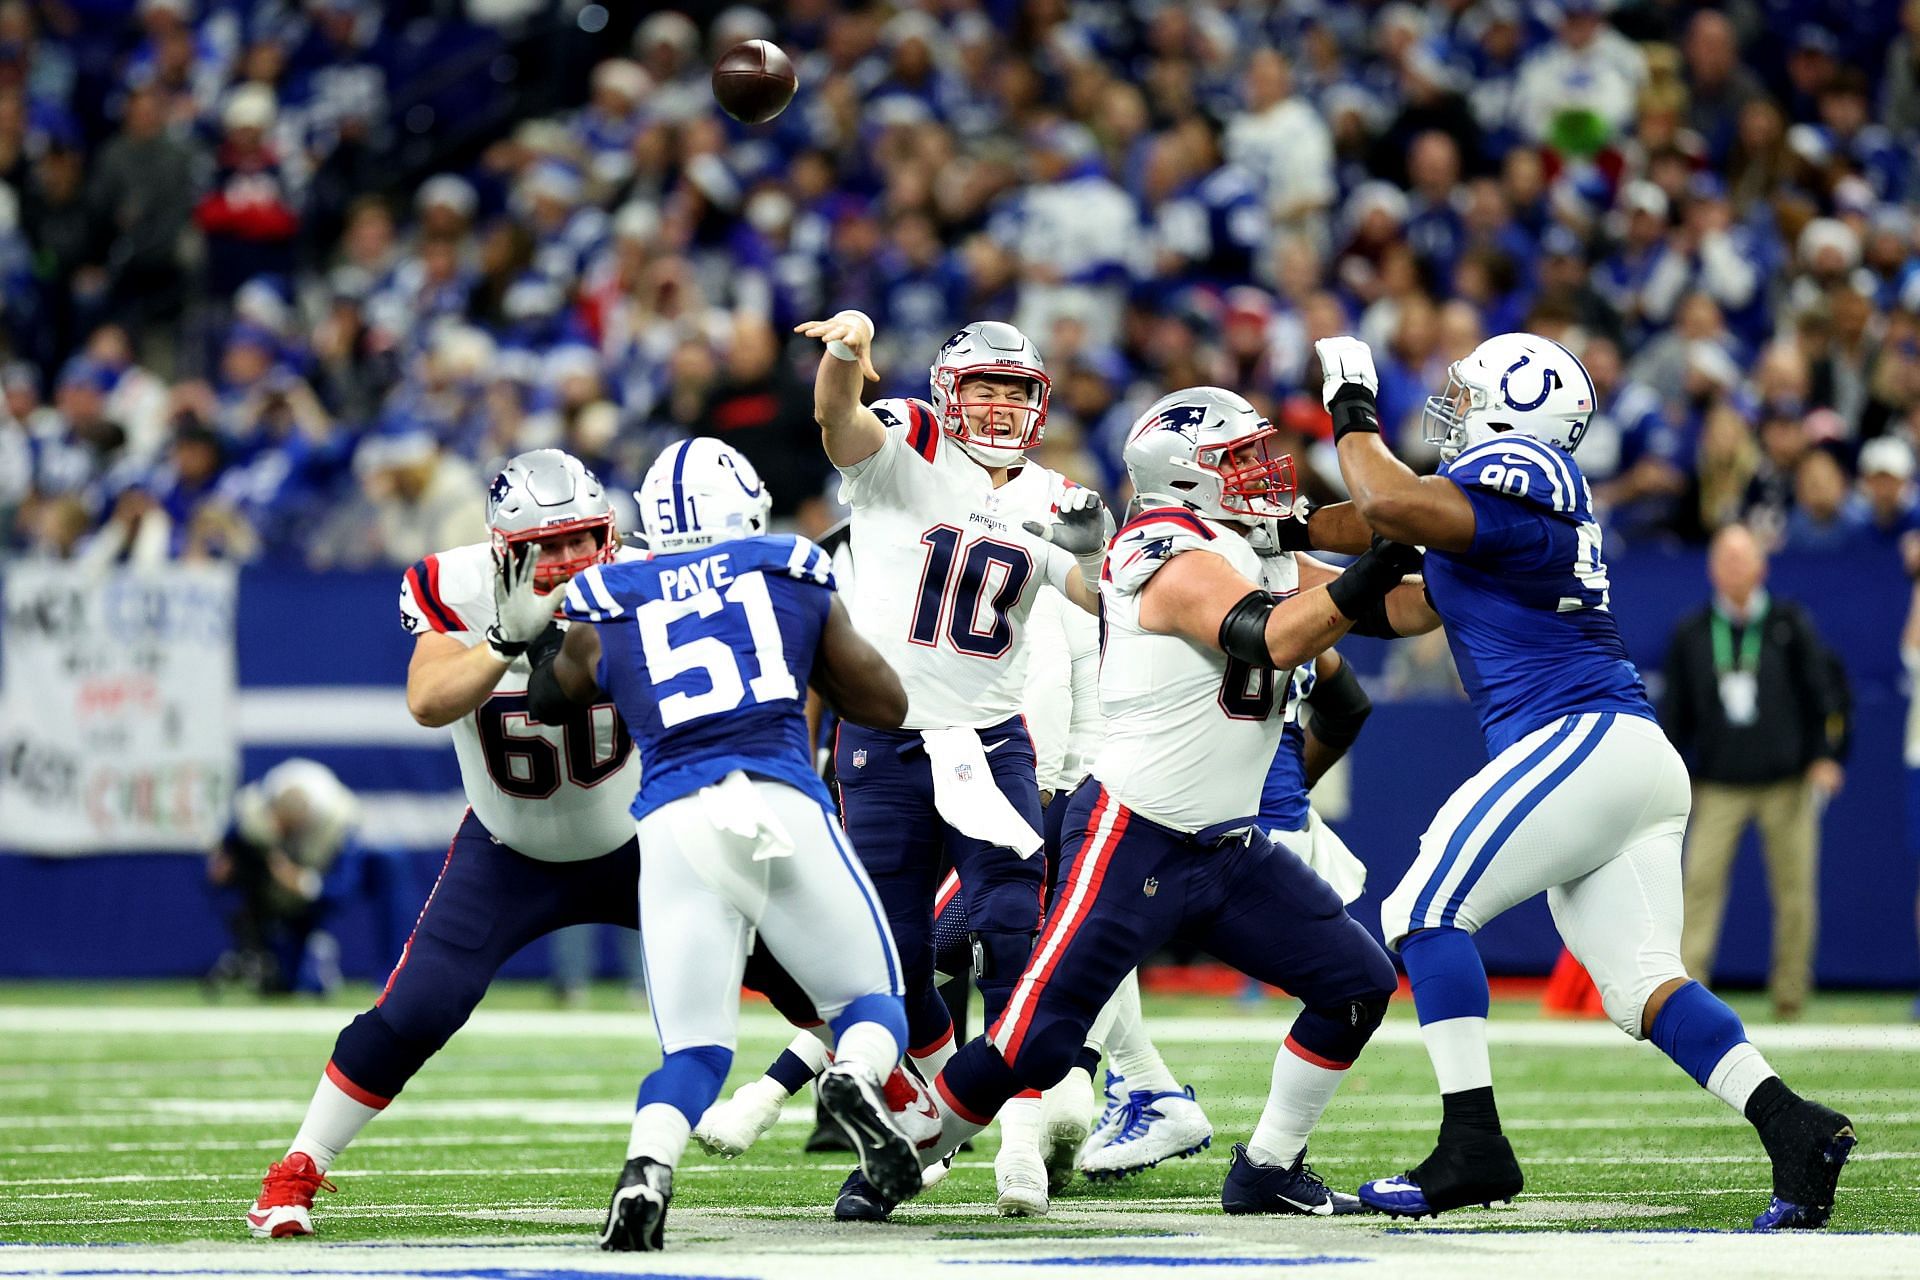 New England Patriots vs. Indianapolis Colts FREE LIVE STREAM (12/18/21):  Watch NFL, Week 15 without cable